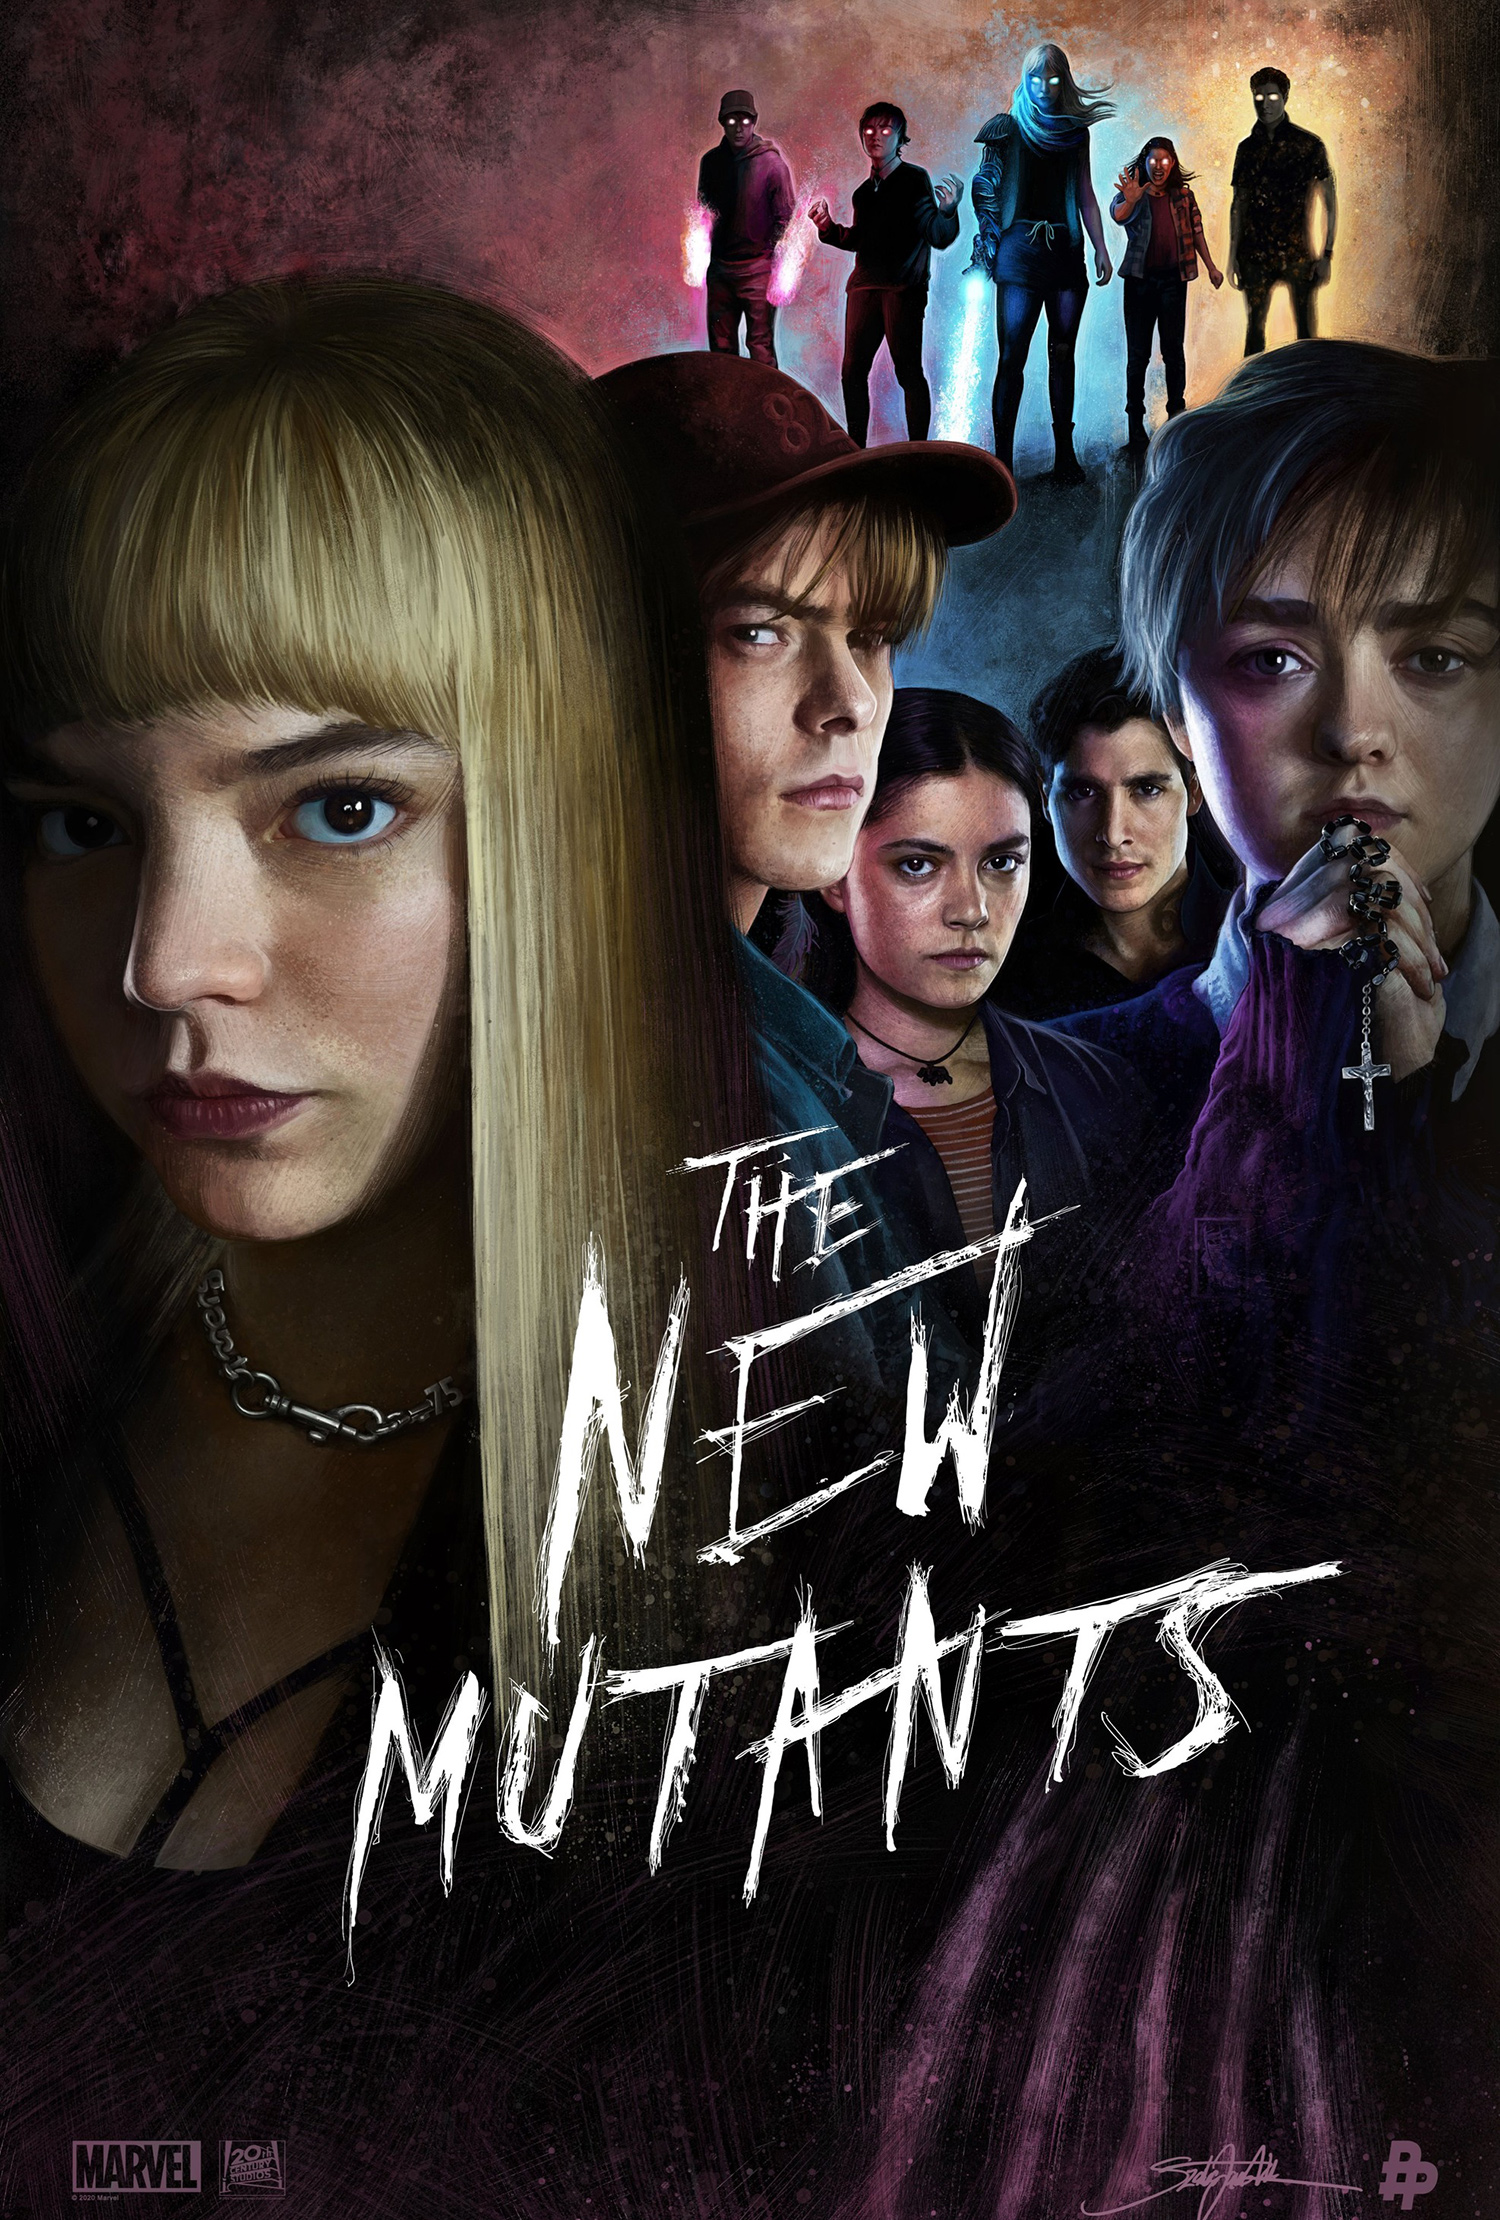 What's The Song In The New Mutants Trailer?